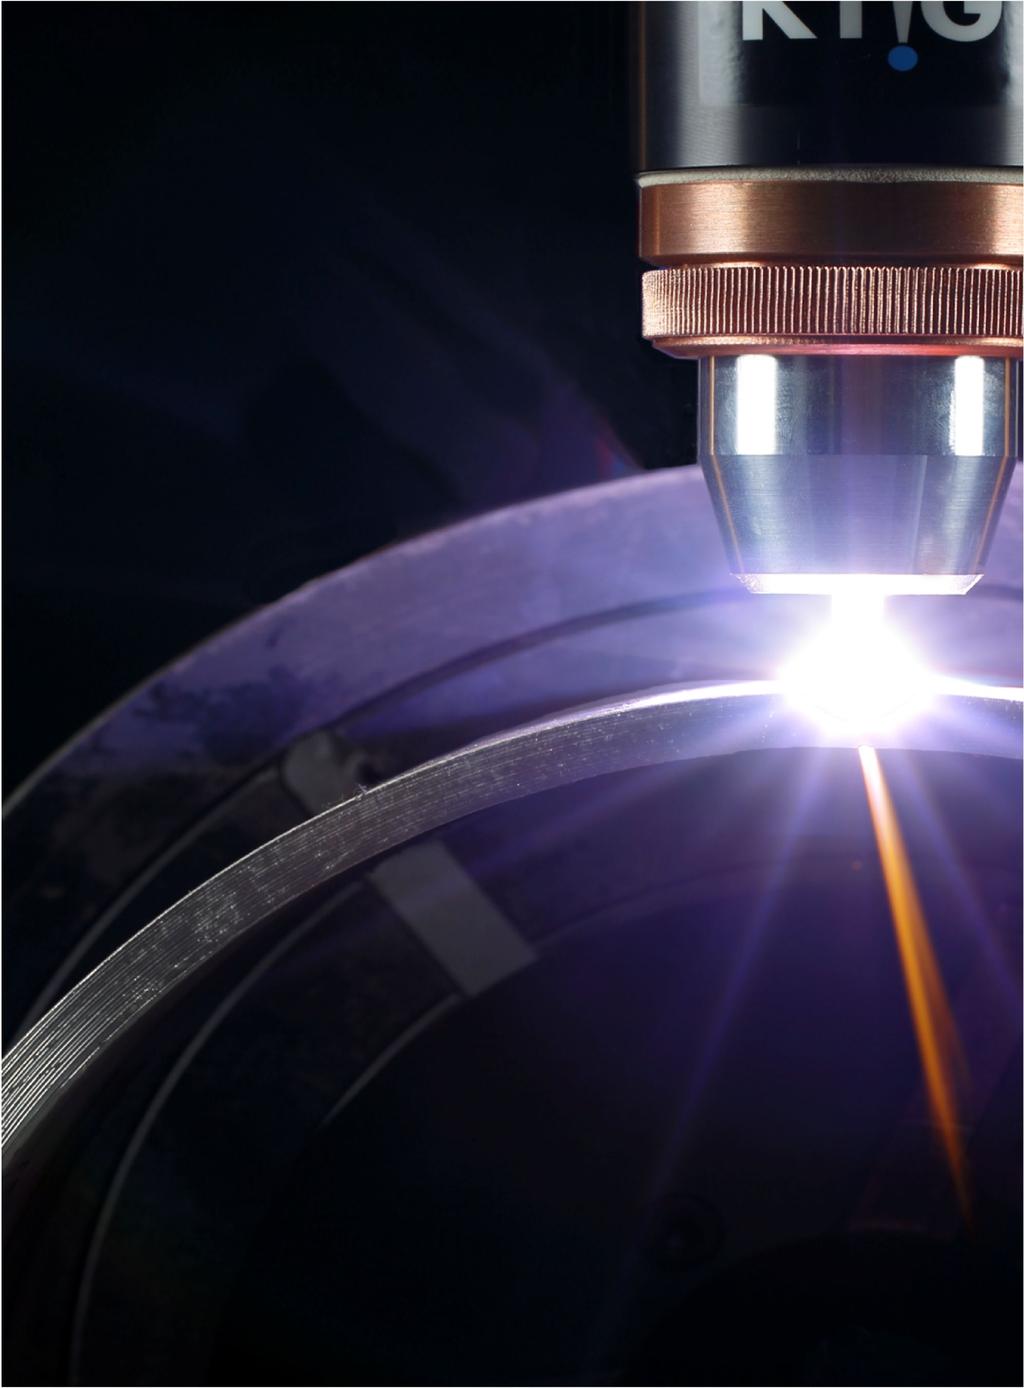 Nuclear grade weld quality comes standard. Precision welding at its finest. A K-TIG weld is performed autogenously, without the need for filler wire, in a single full-penetration pass.